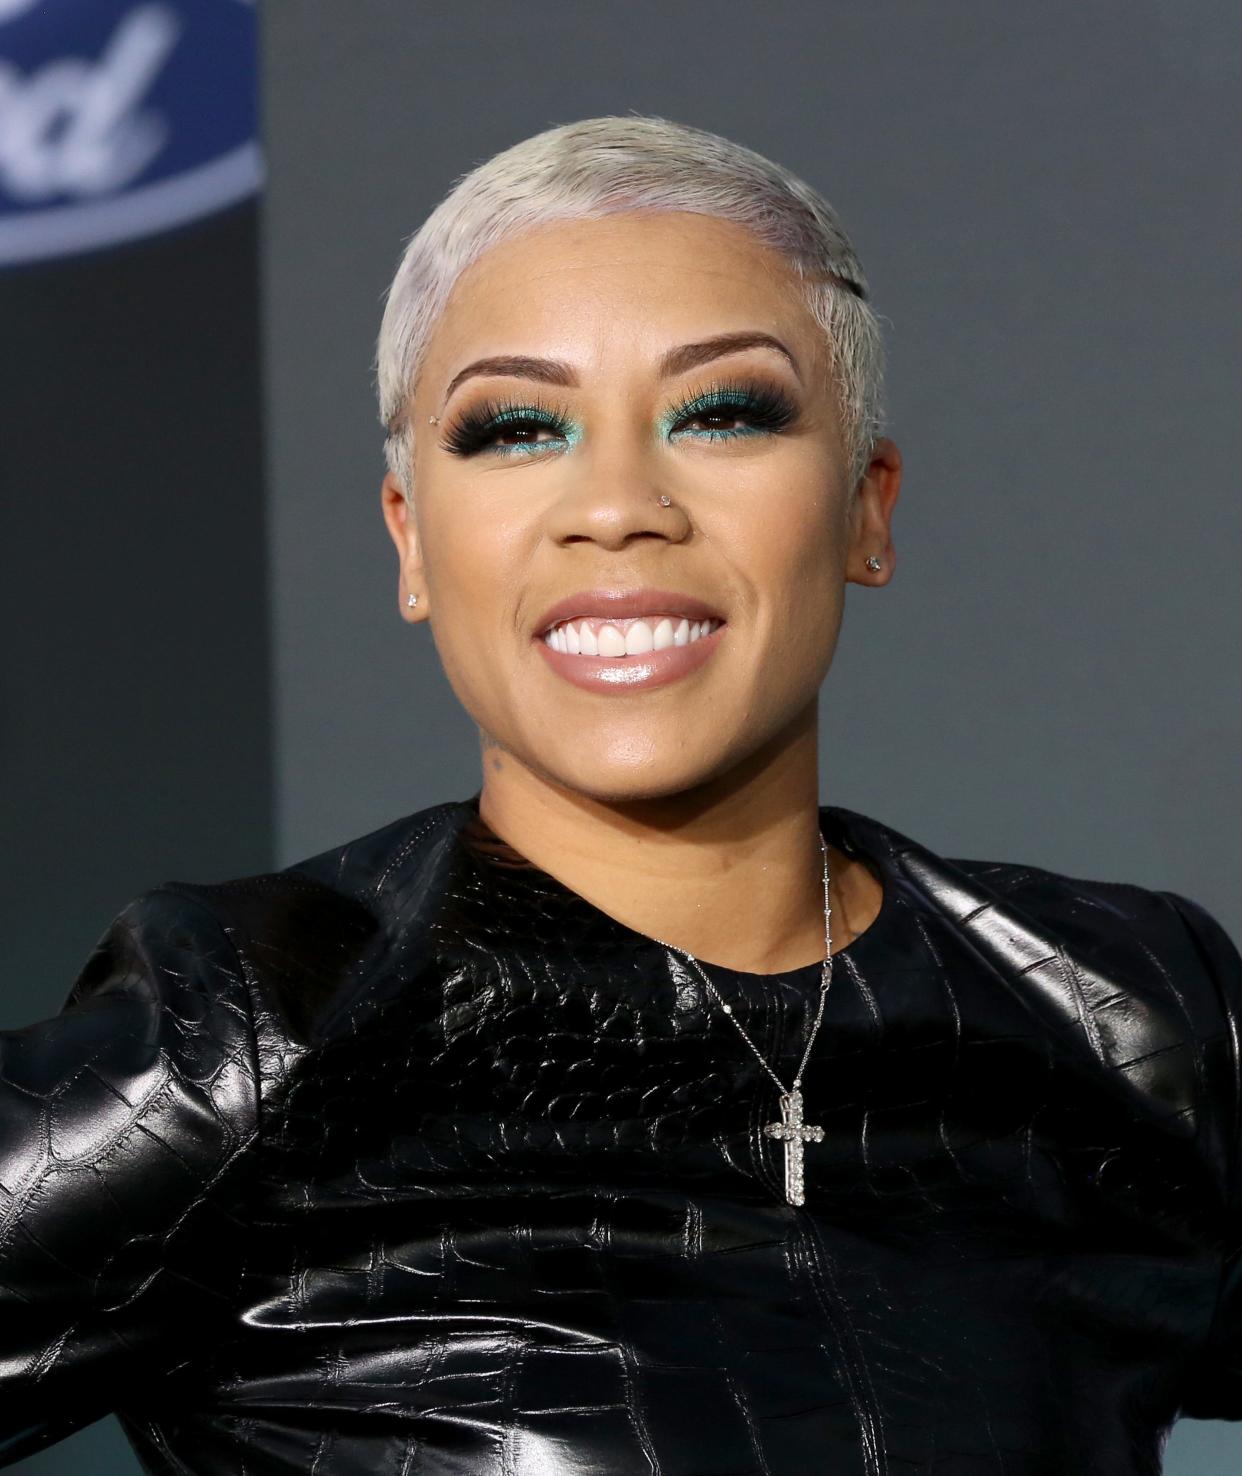 Keyshia Cole confirmed her mother died in a social media tribute Thursday, alongside a series of photos of her mother throughout the years.